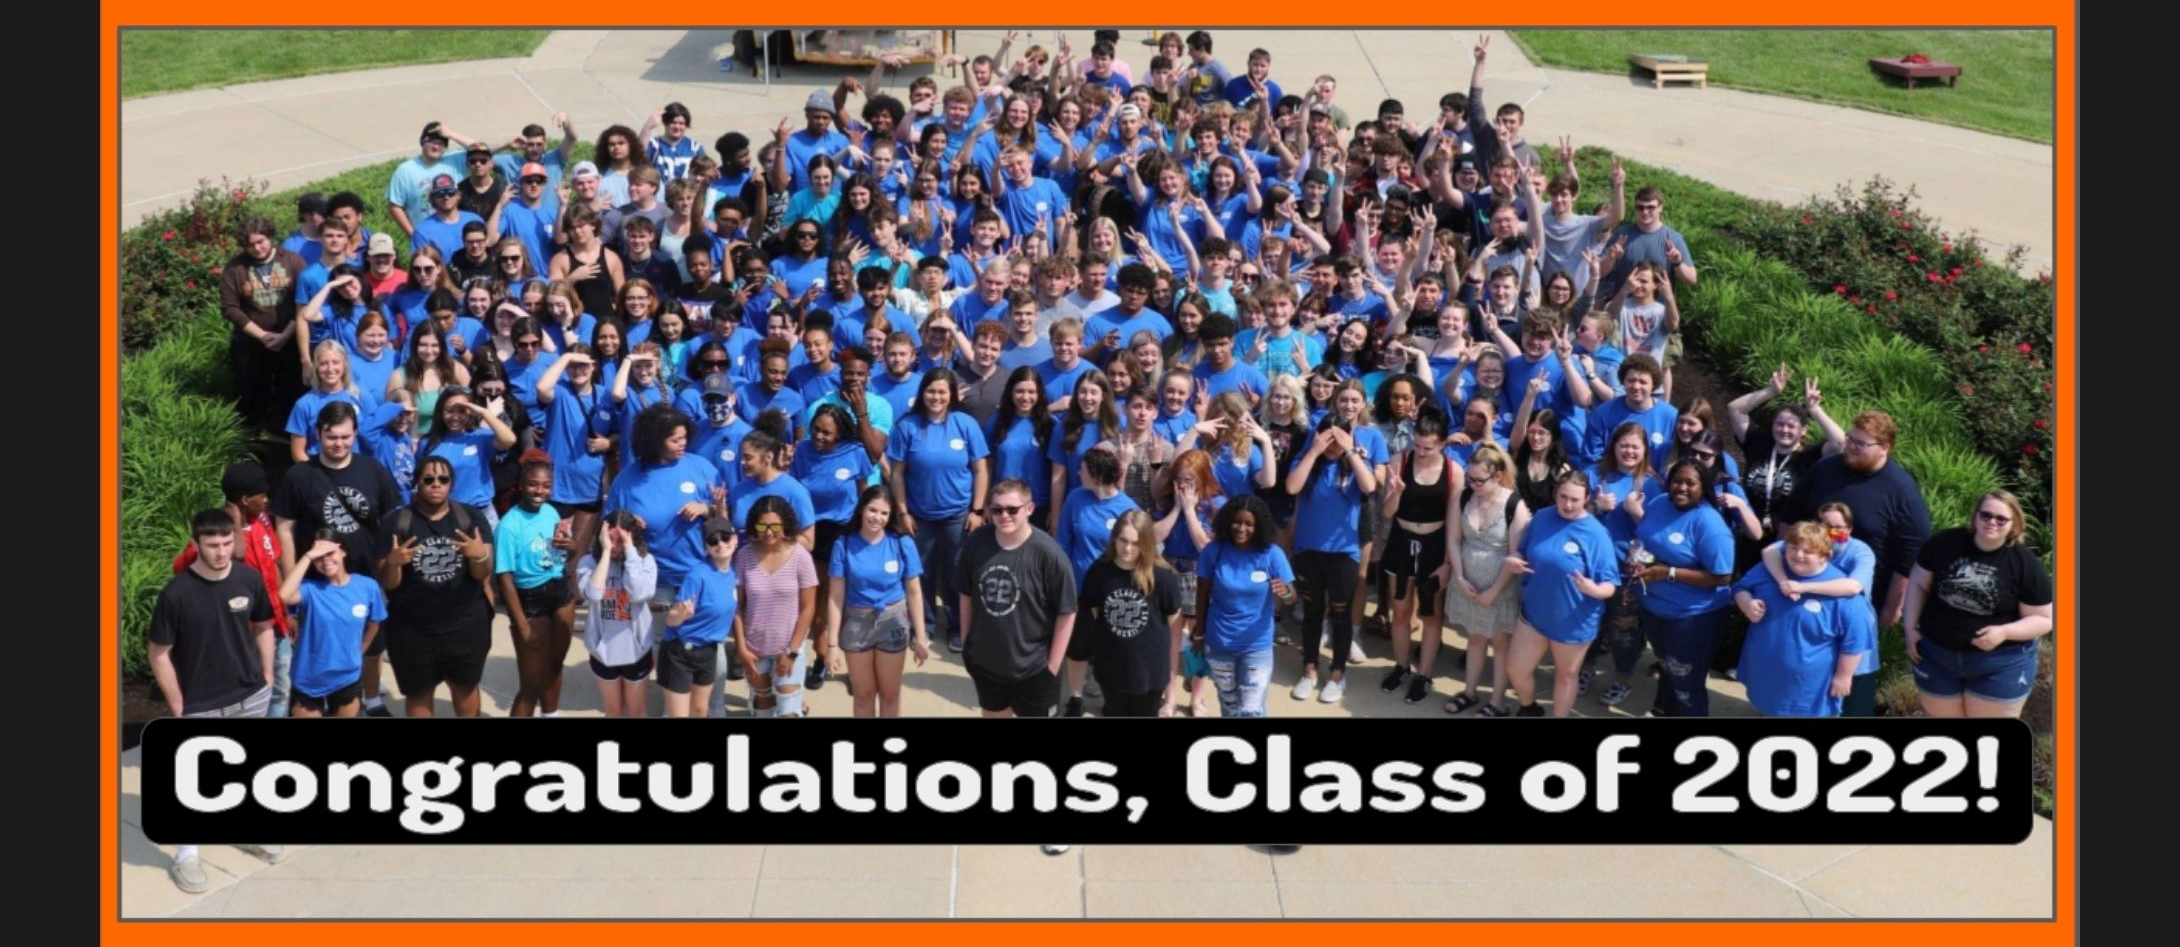 It's a Great Day to Be a Ram! Congratulations, Class of 2022!